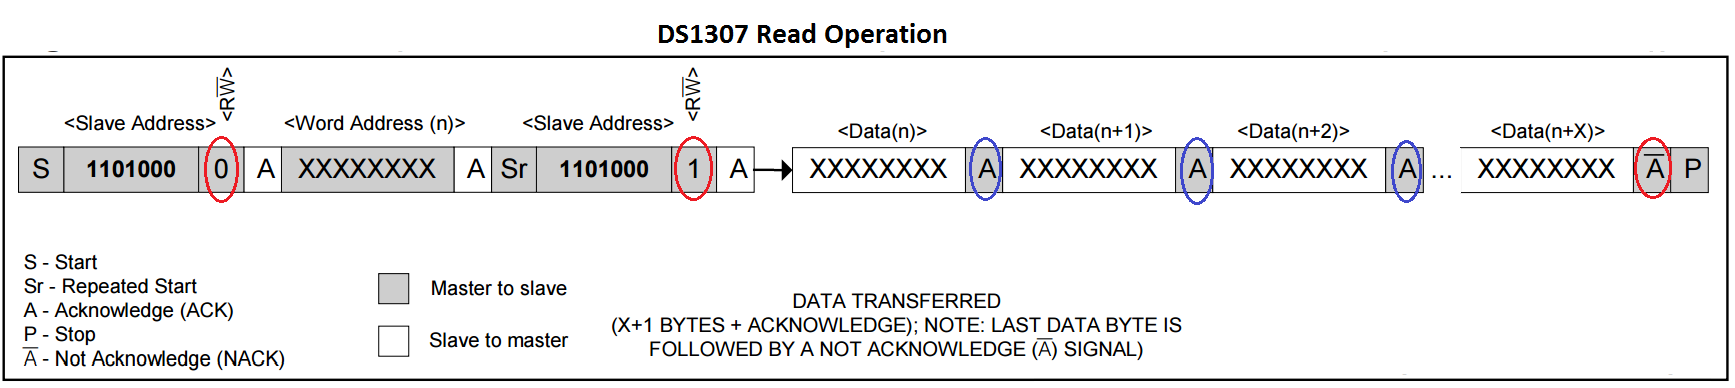 DS1307 ReadOperation.png